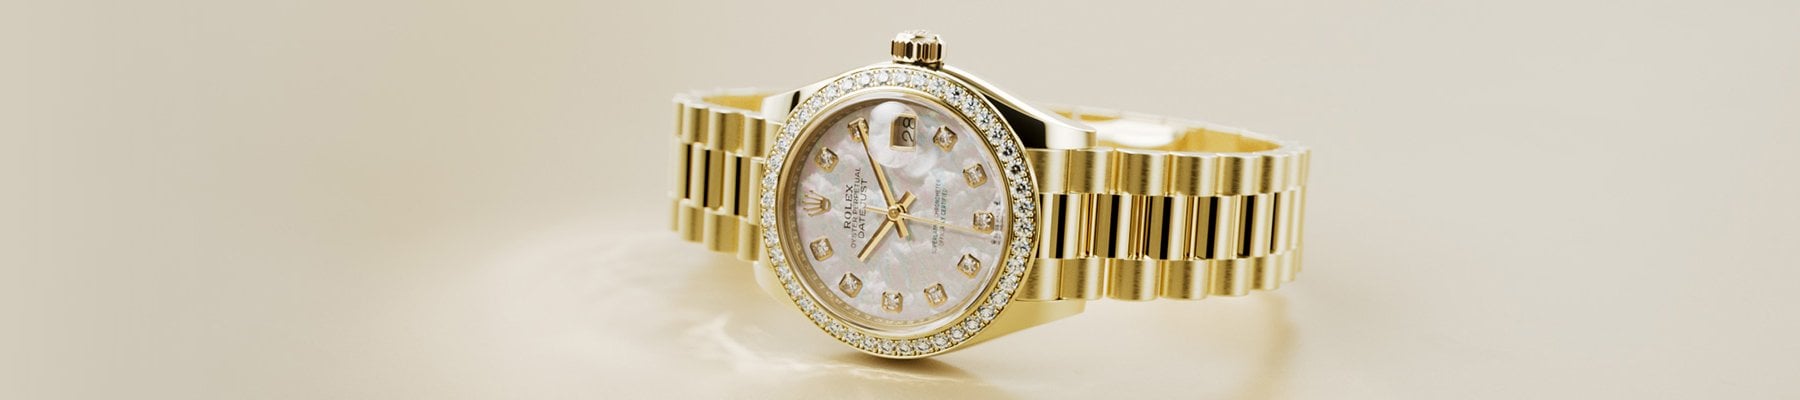 THE AUDACITY OF EXCELLENCE THE LADY-DATEJUST